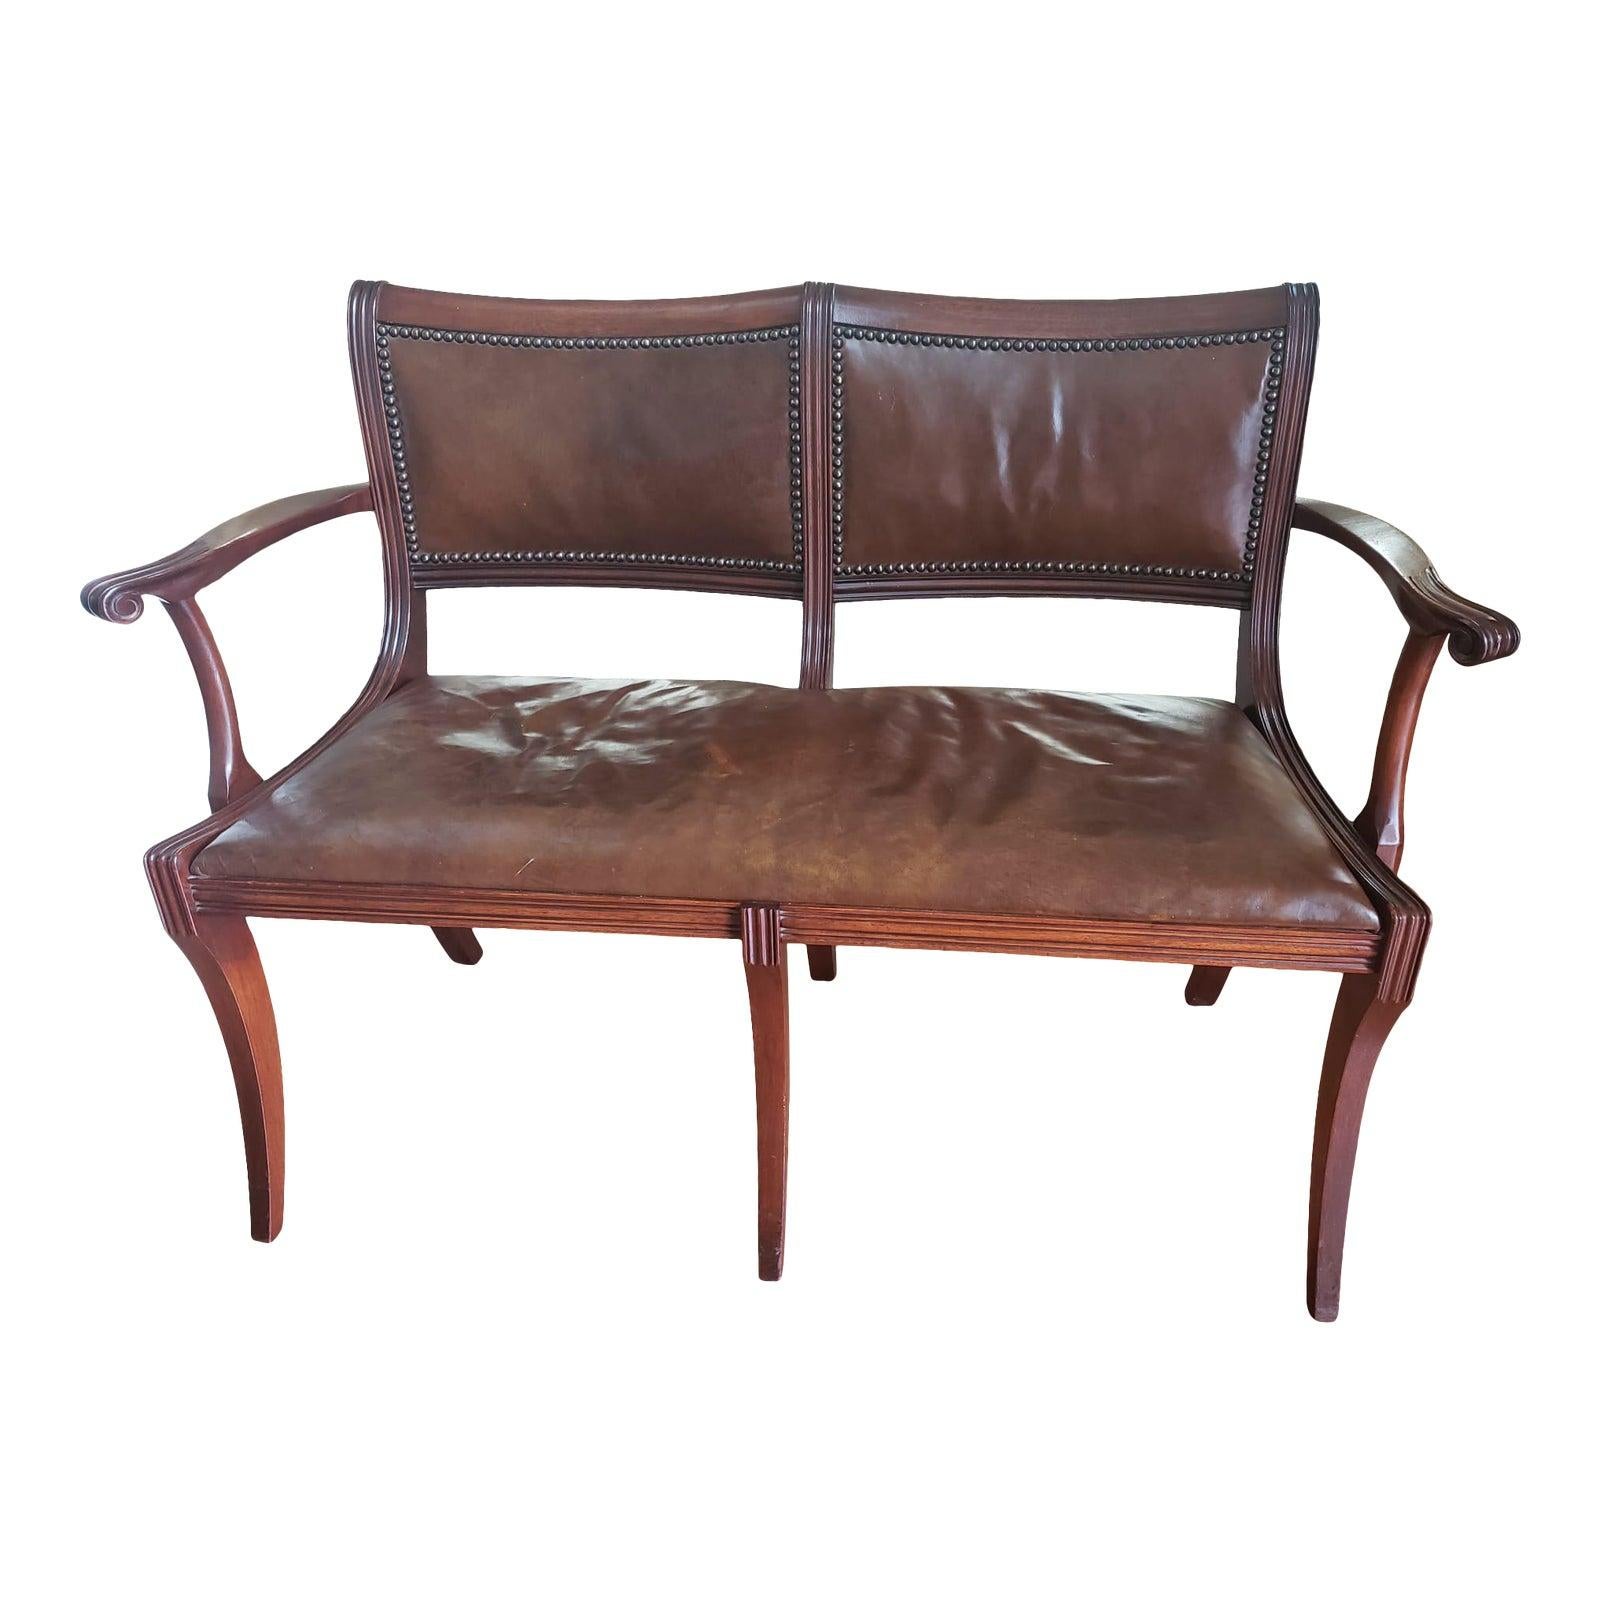 1920s Antique Mahogany Top Grain Leather Settee by Colonial Manufacturing